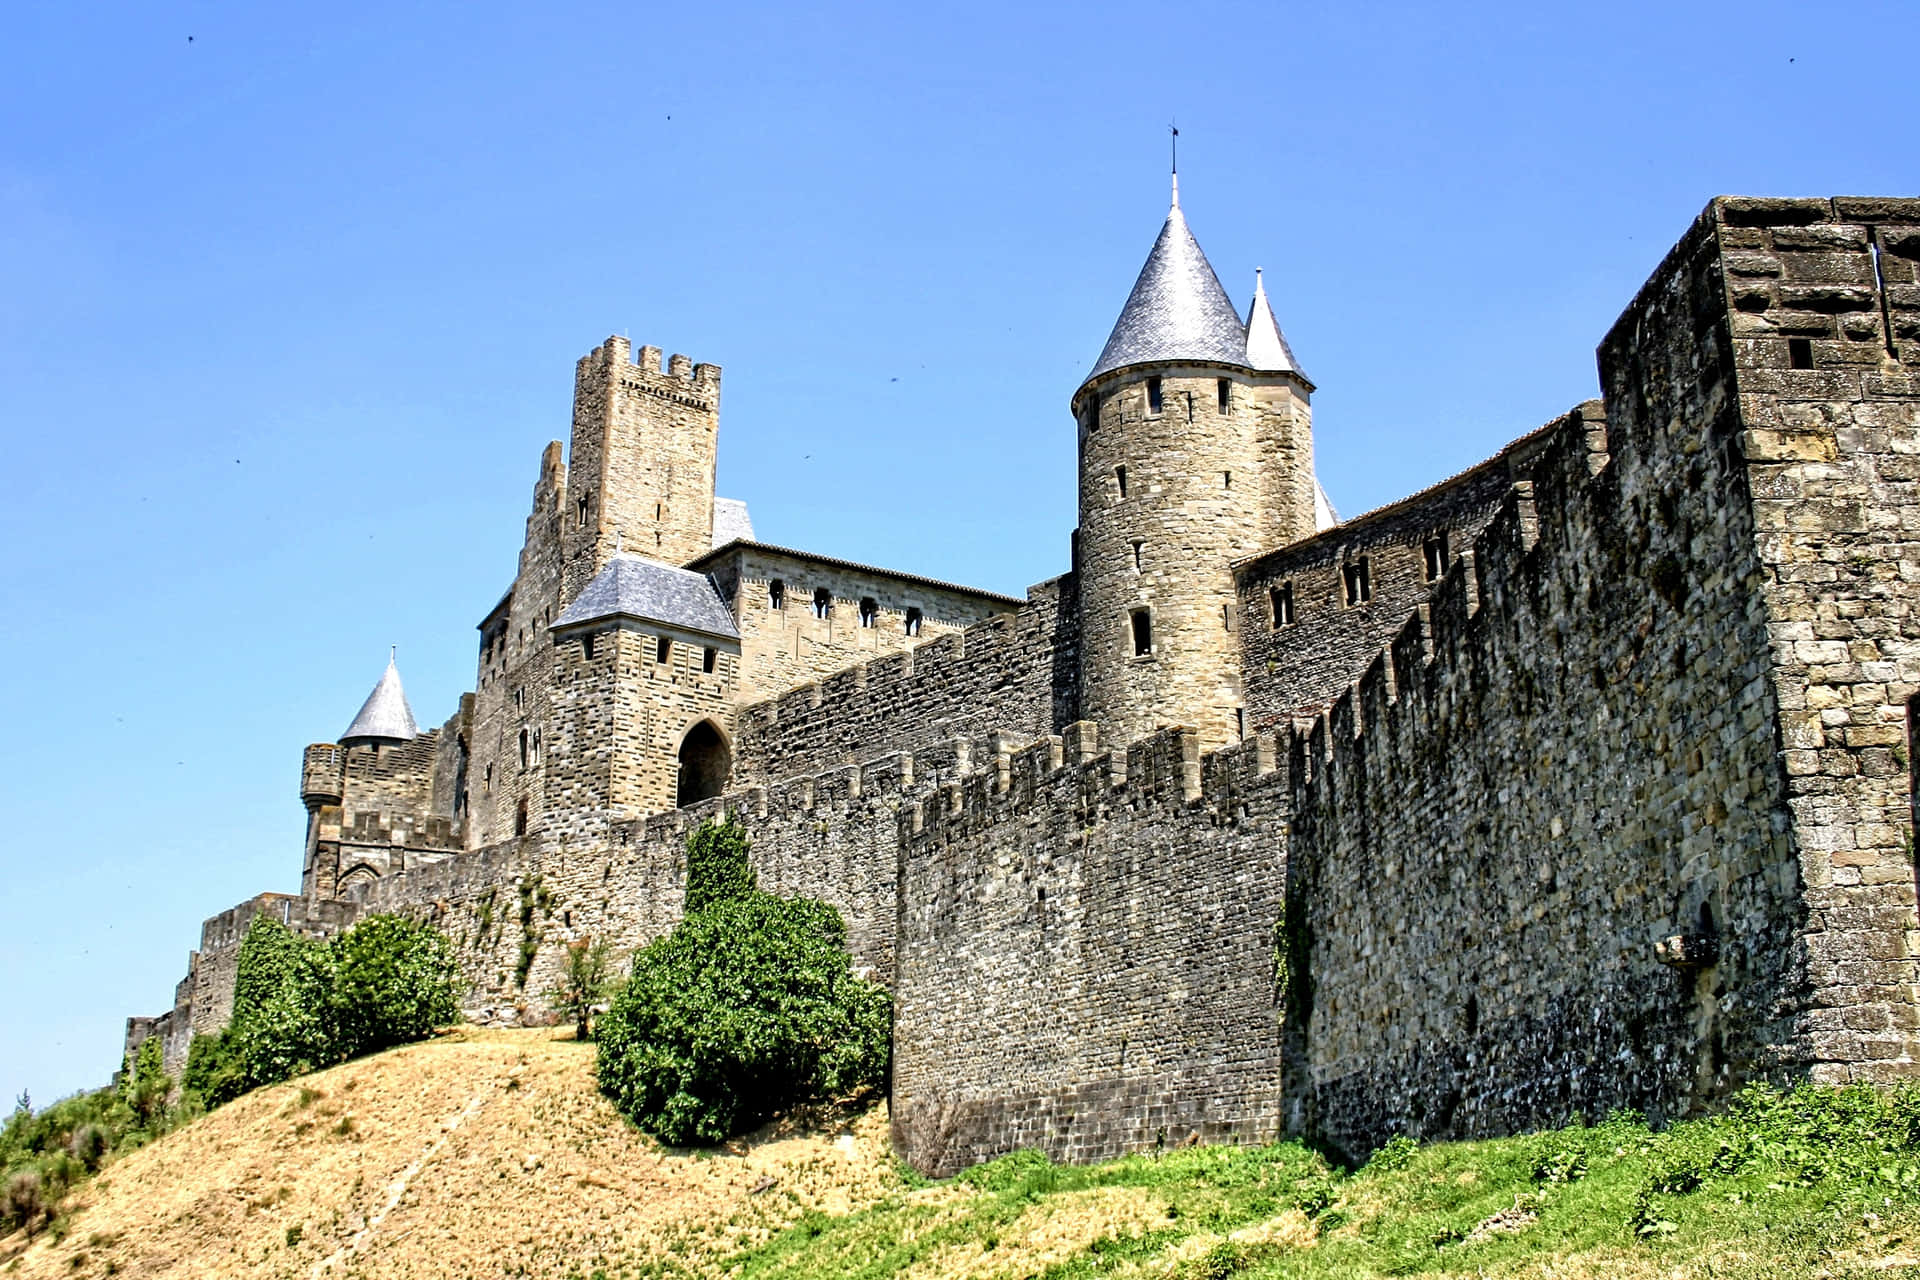 A View of a Medieval Fortress